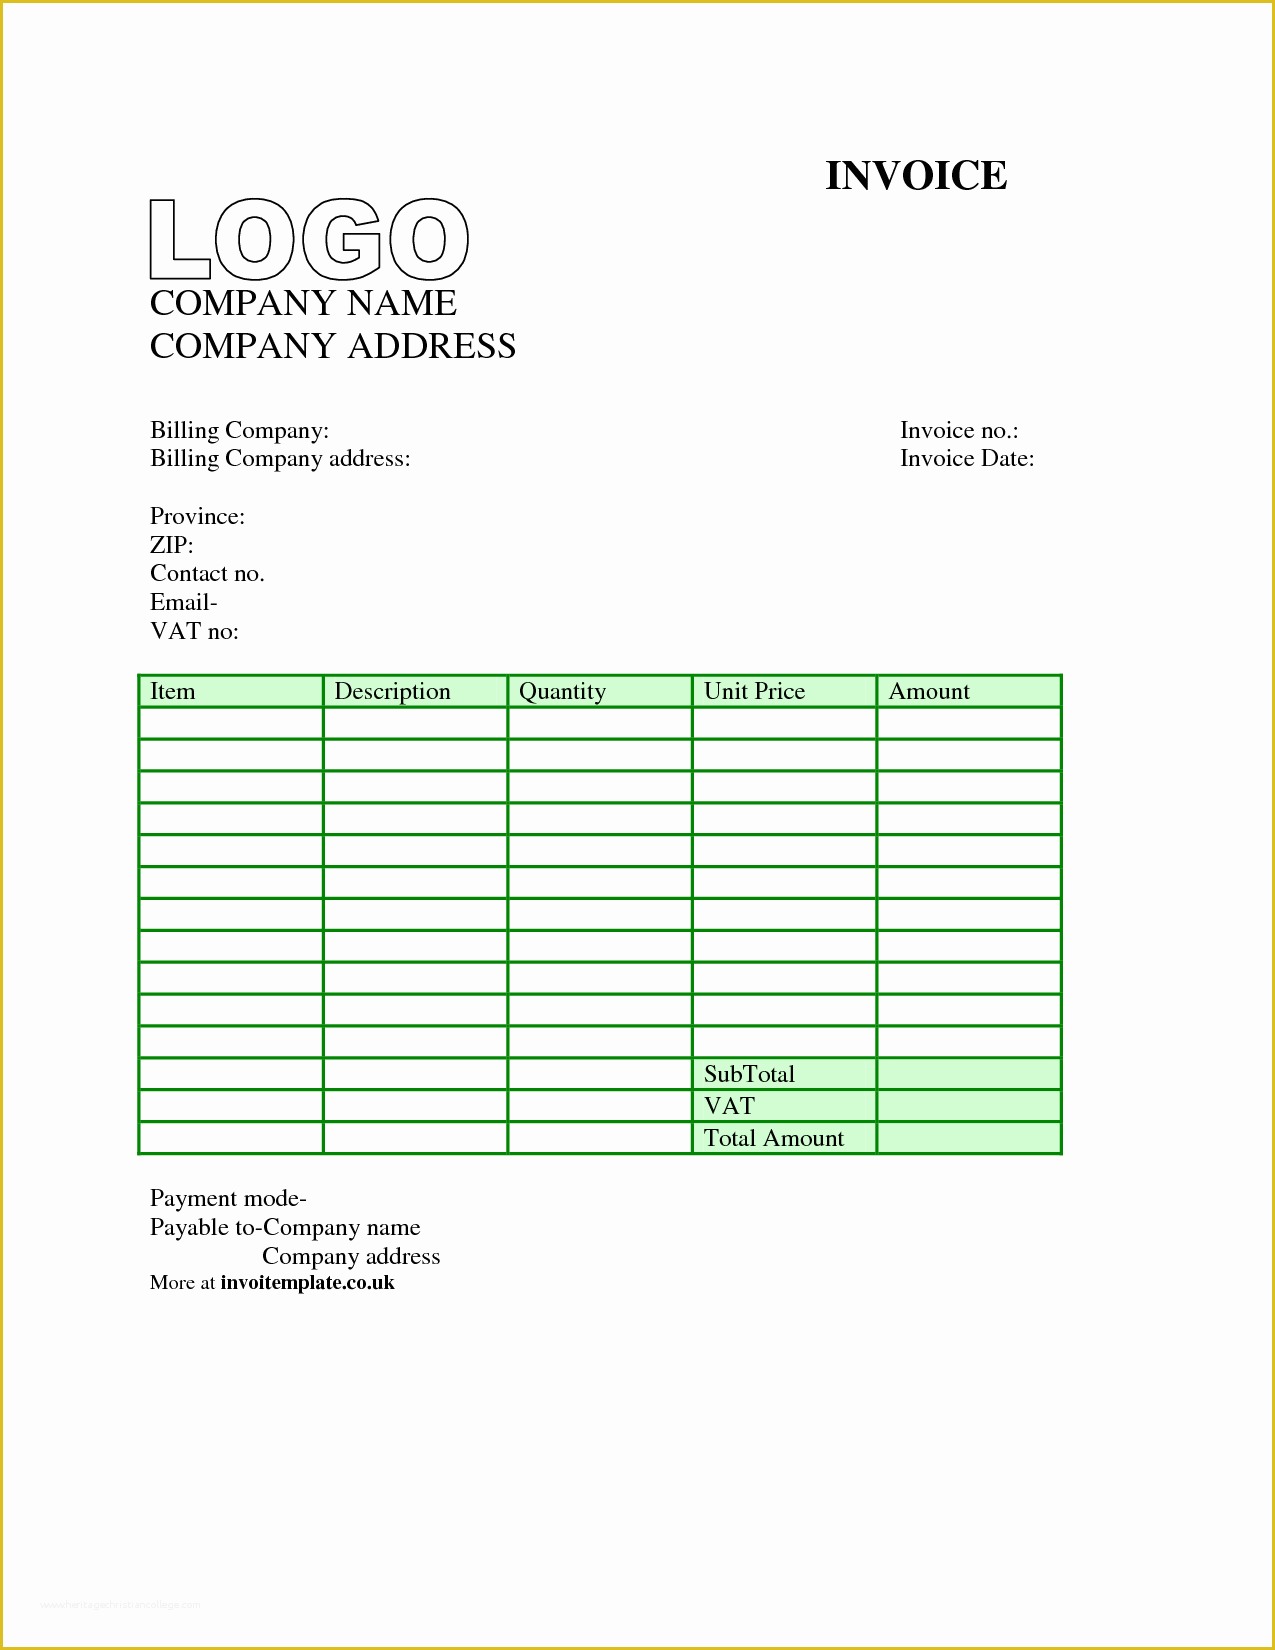 create an excel invoice template